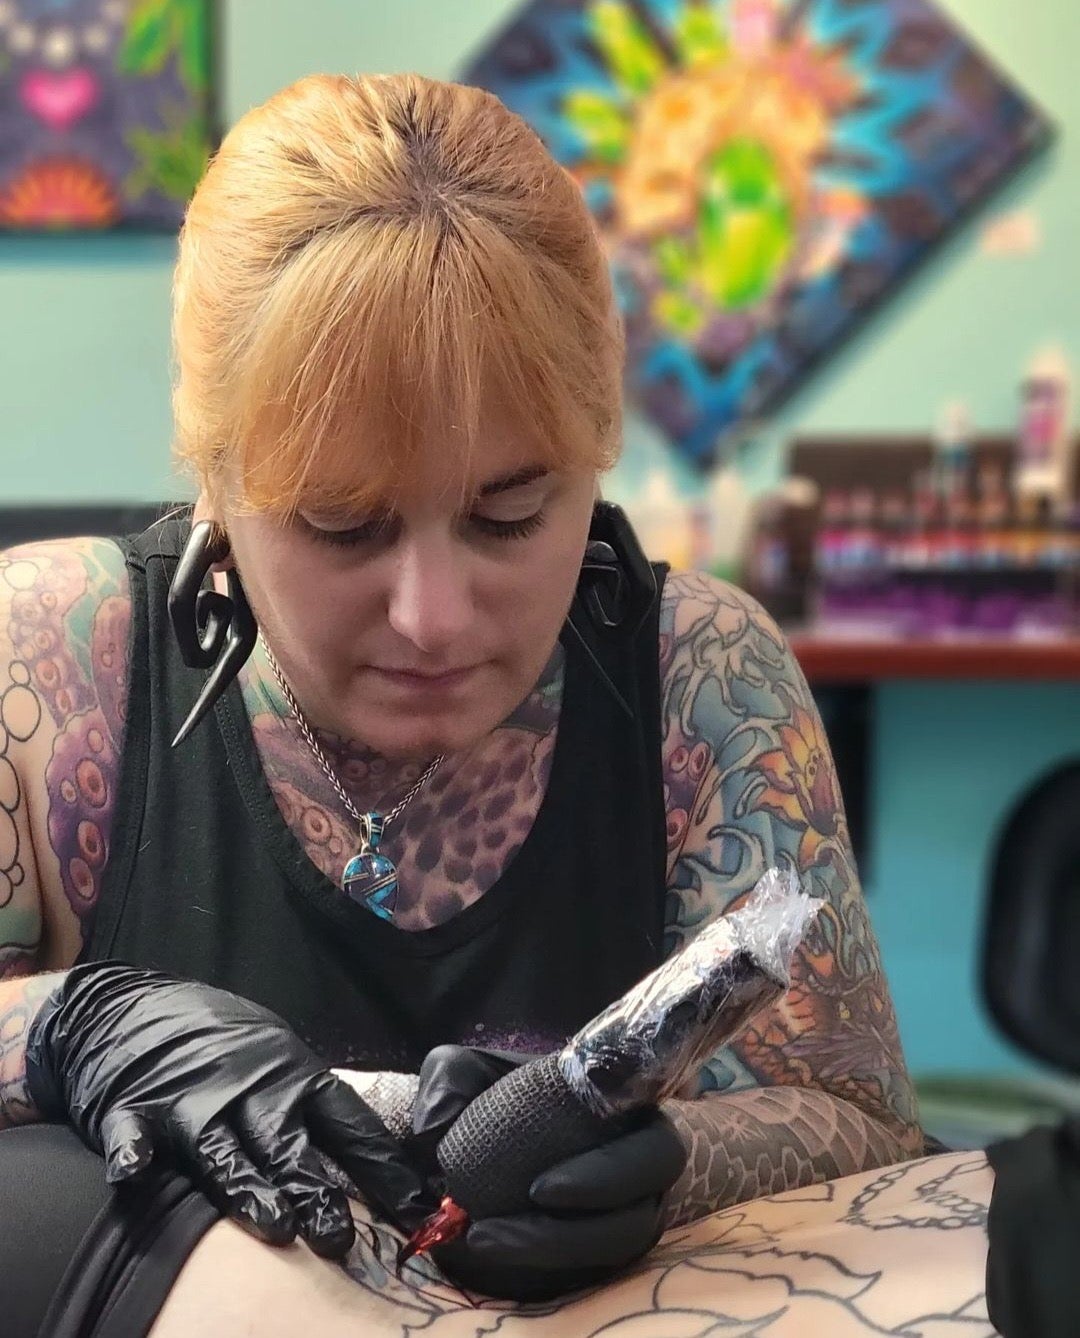 Women tattoo artists foster community through work connections - el Don News